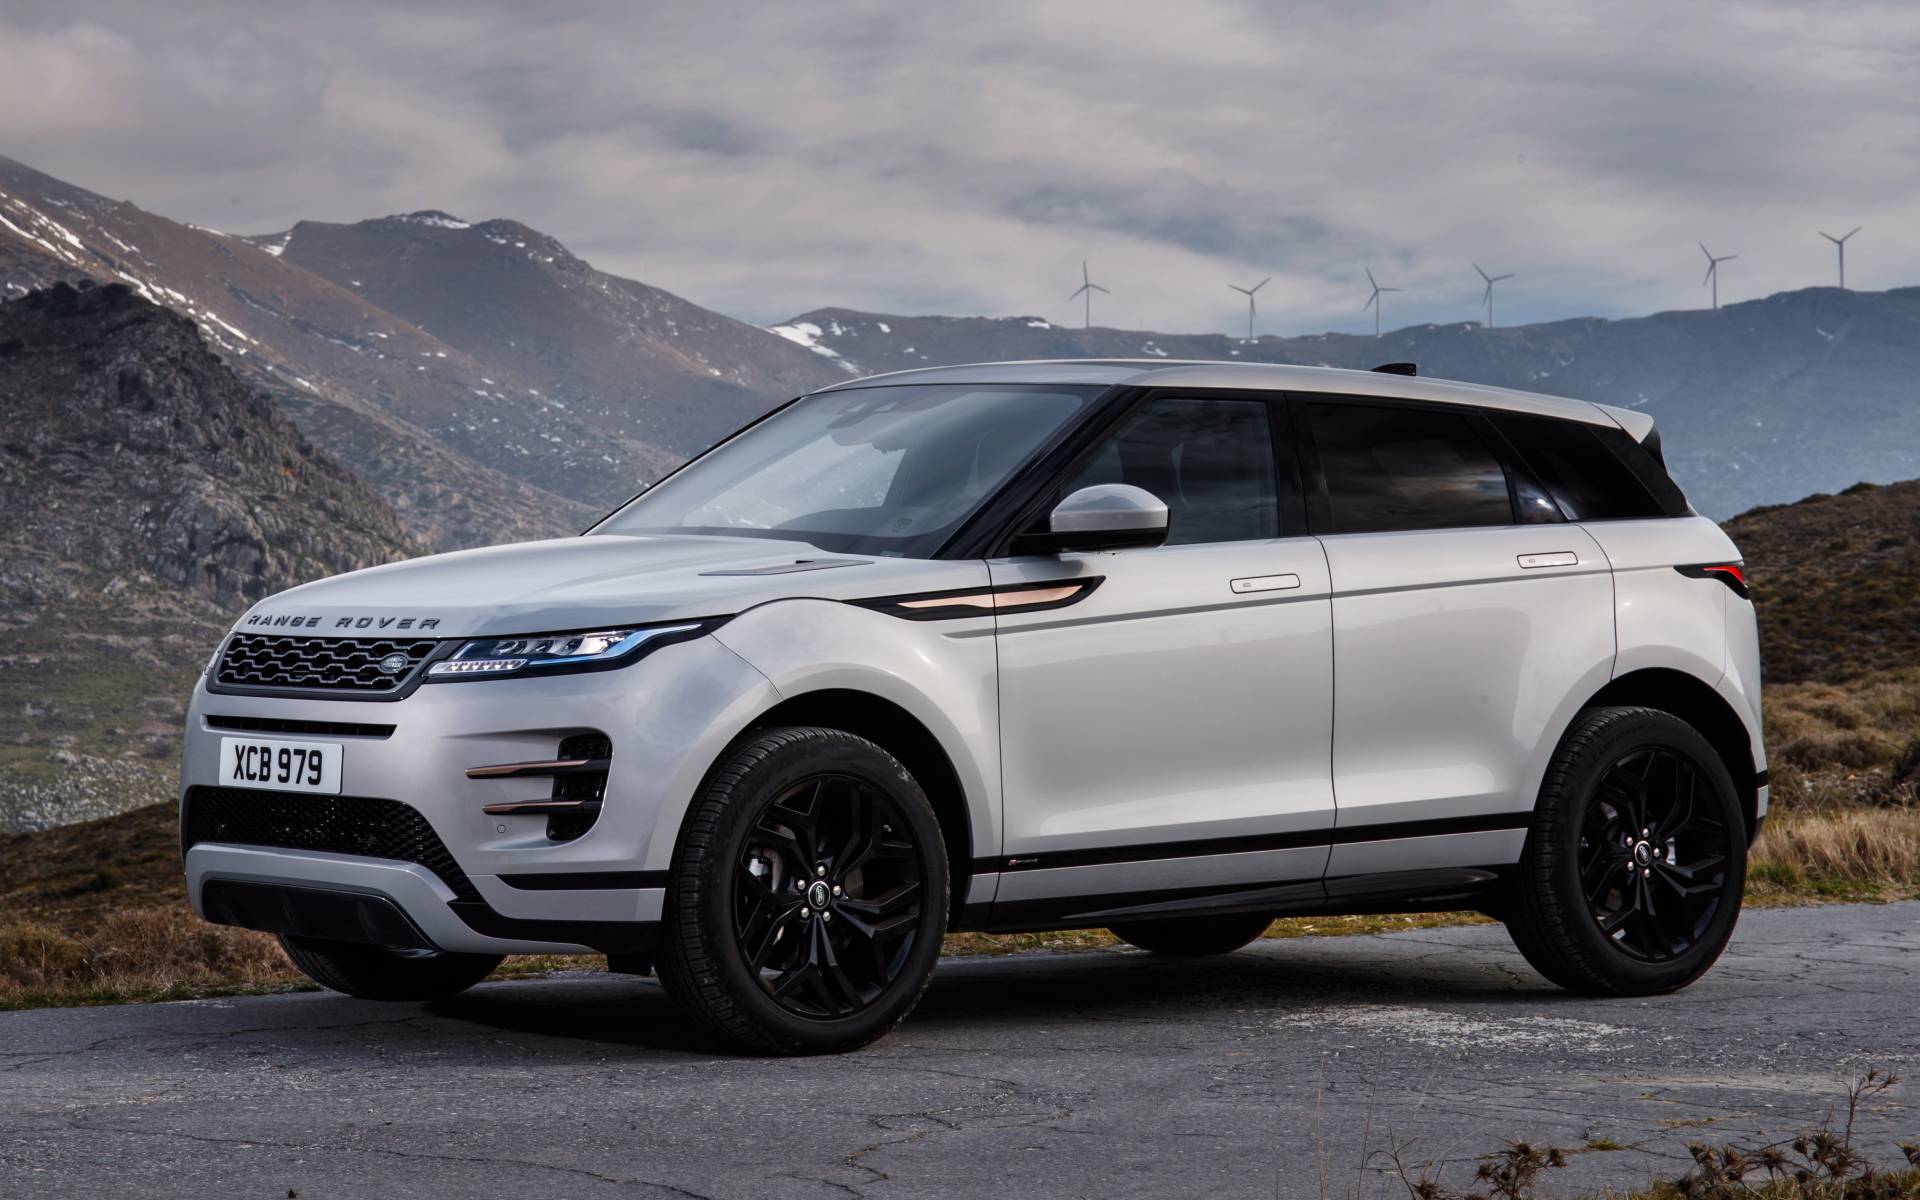 2020 Land Rover Range Rover Evoque Se P250 Specifications The Car Guide